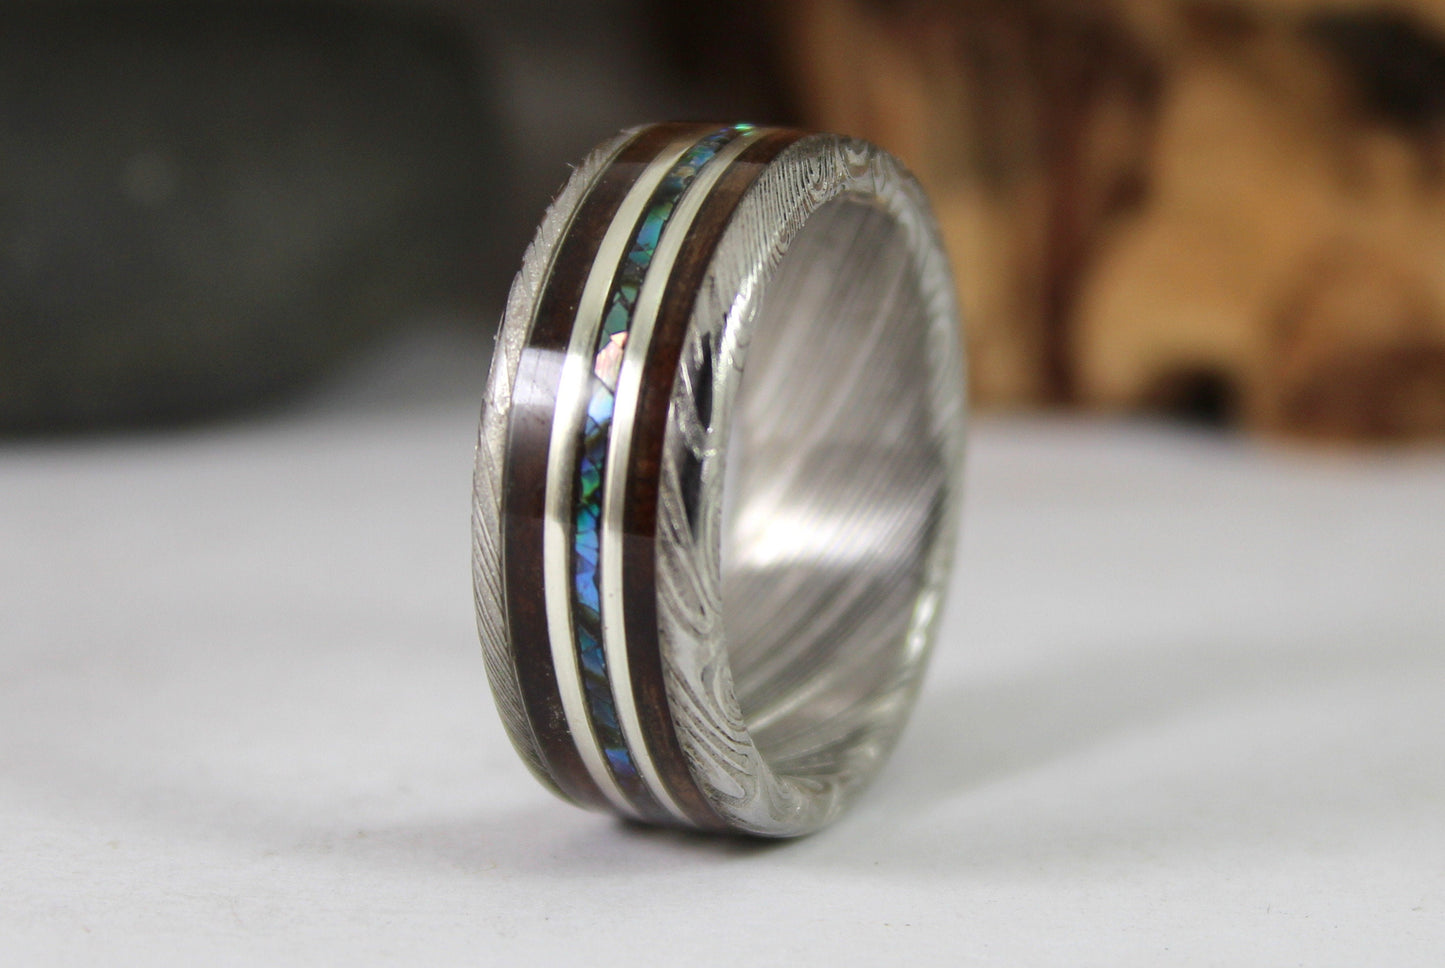 Damascus Steel Ring with Wood, Abalone Shell and Silver